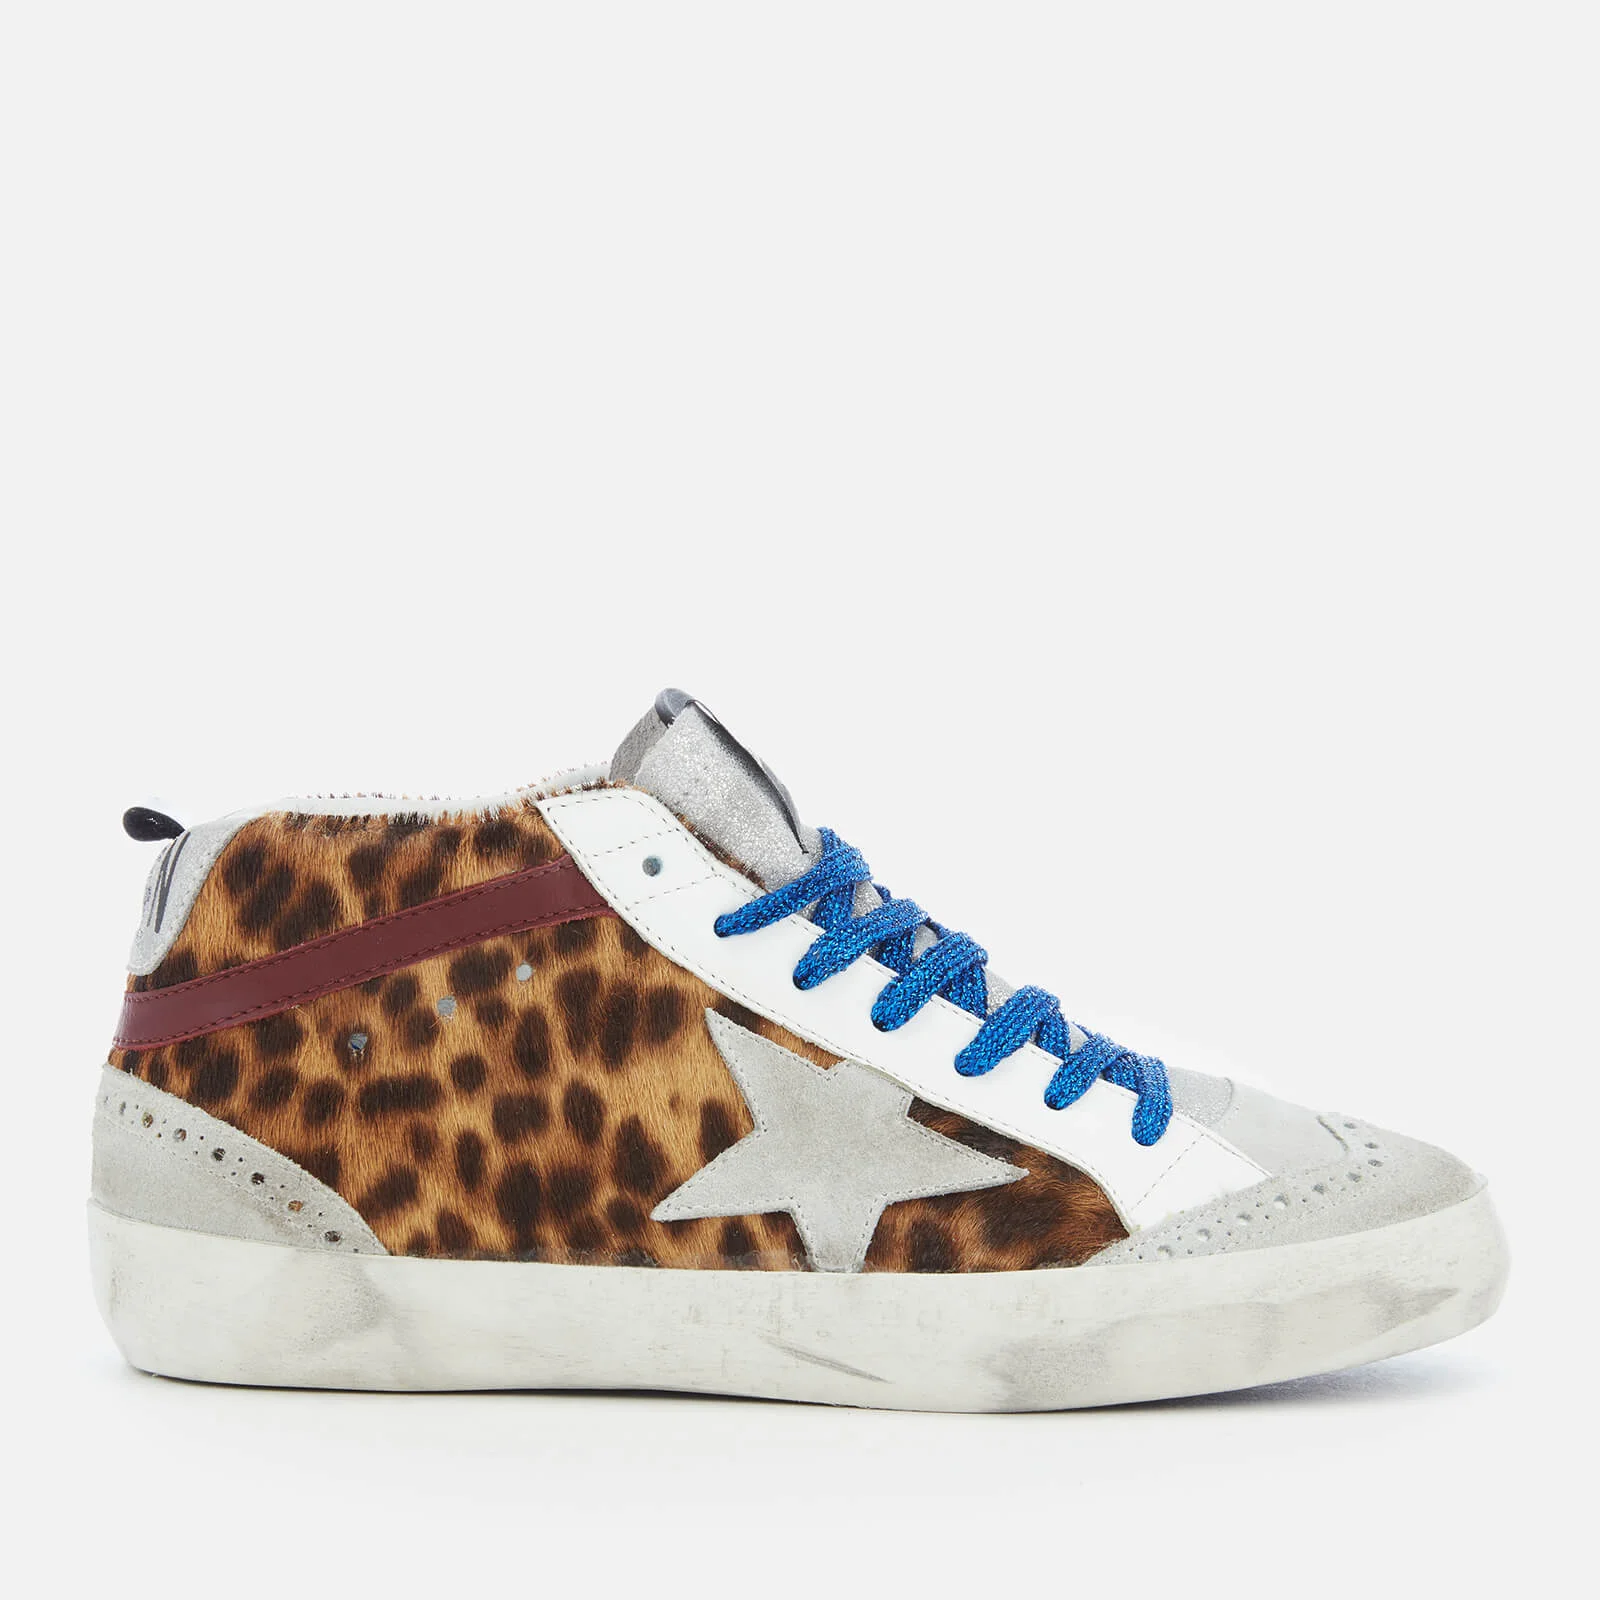 Golden Goose Women's Mid Star Trainers - Spotted Horsy/Grey Star Image 1